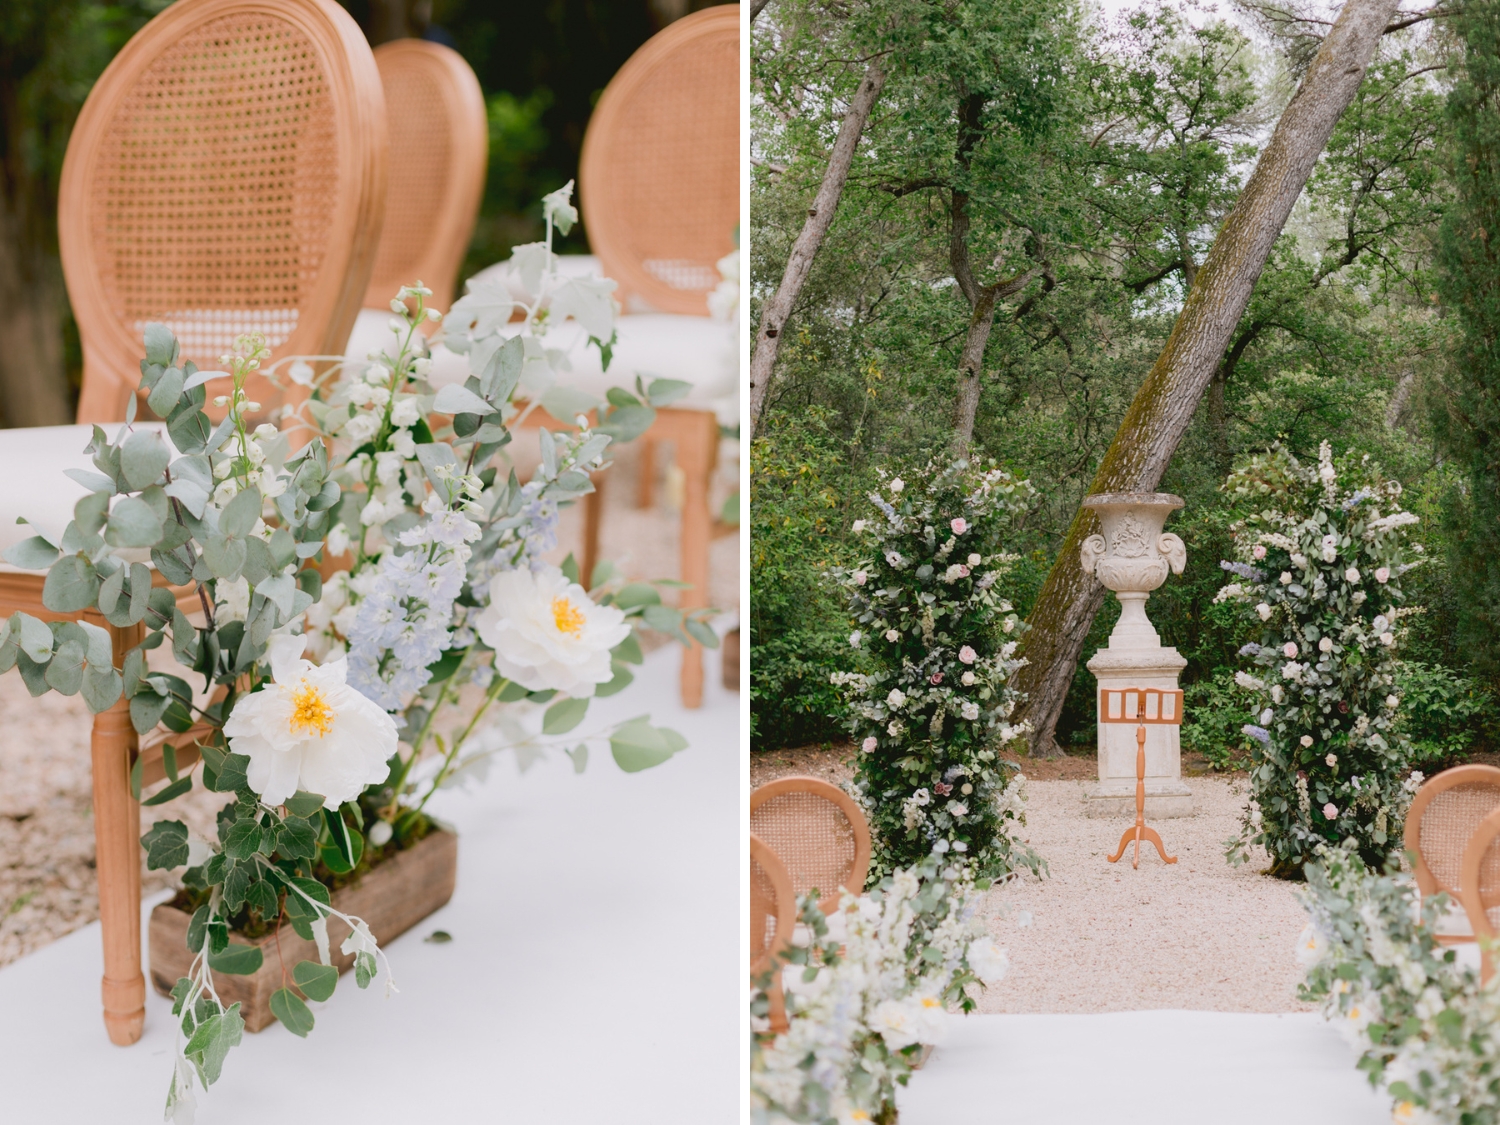 Ceremony floral decorations at a Spring Wedding at Chateau Martinay in Provence, France